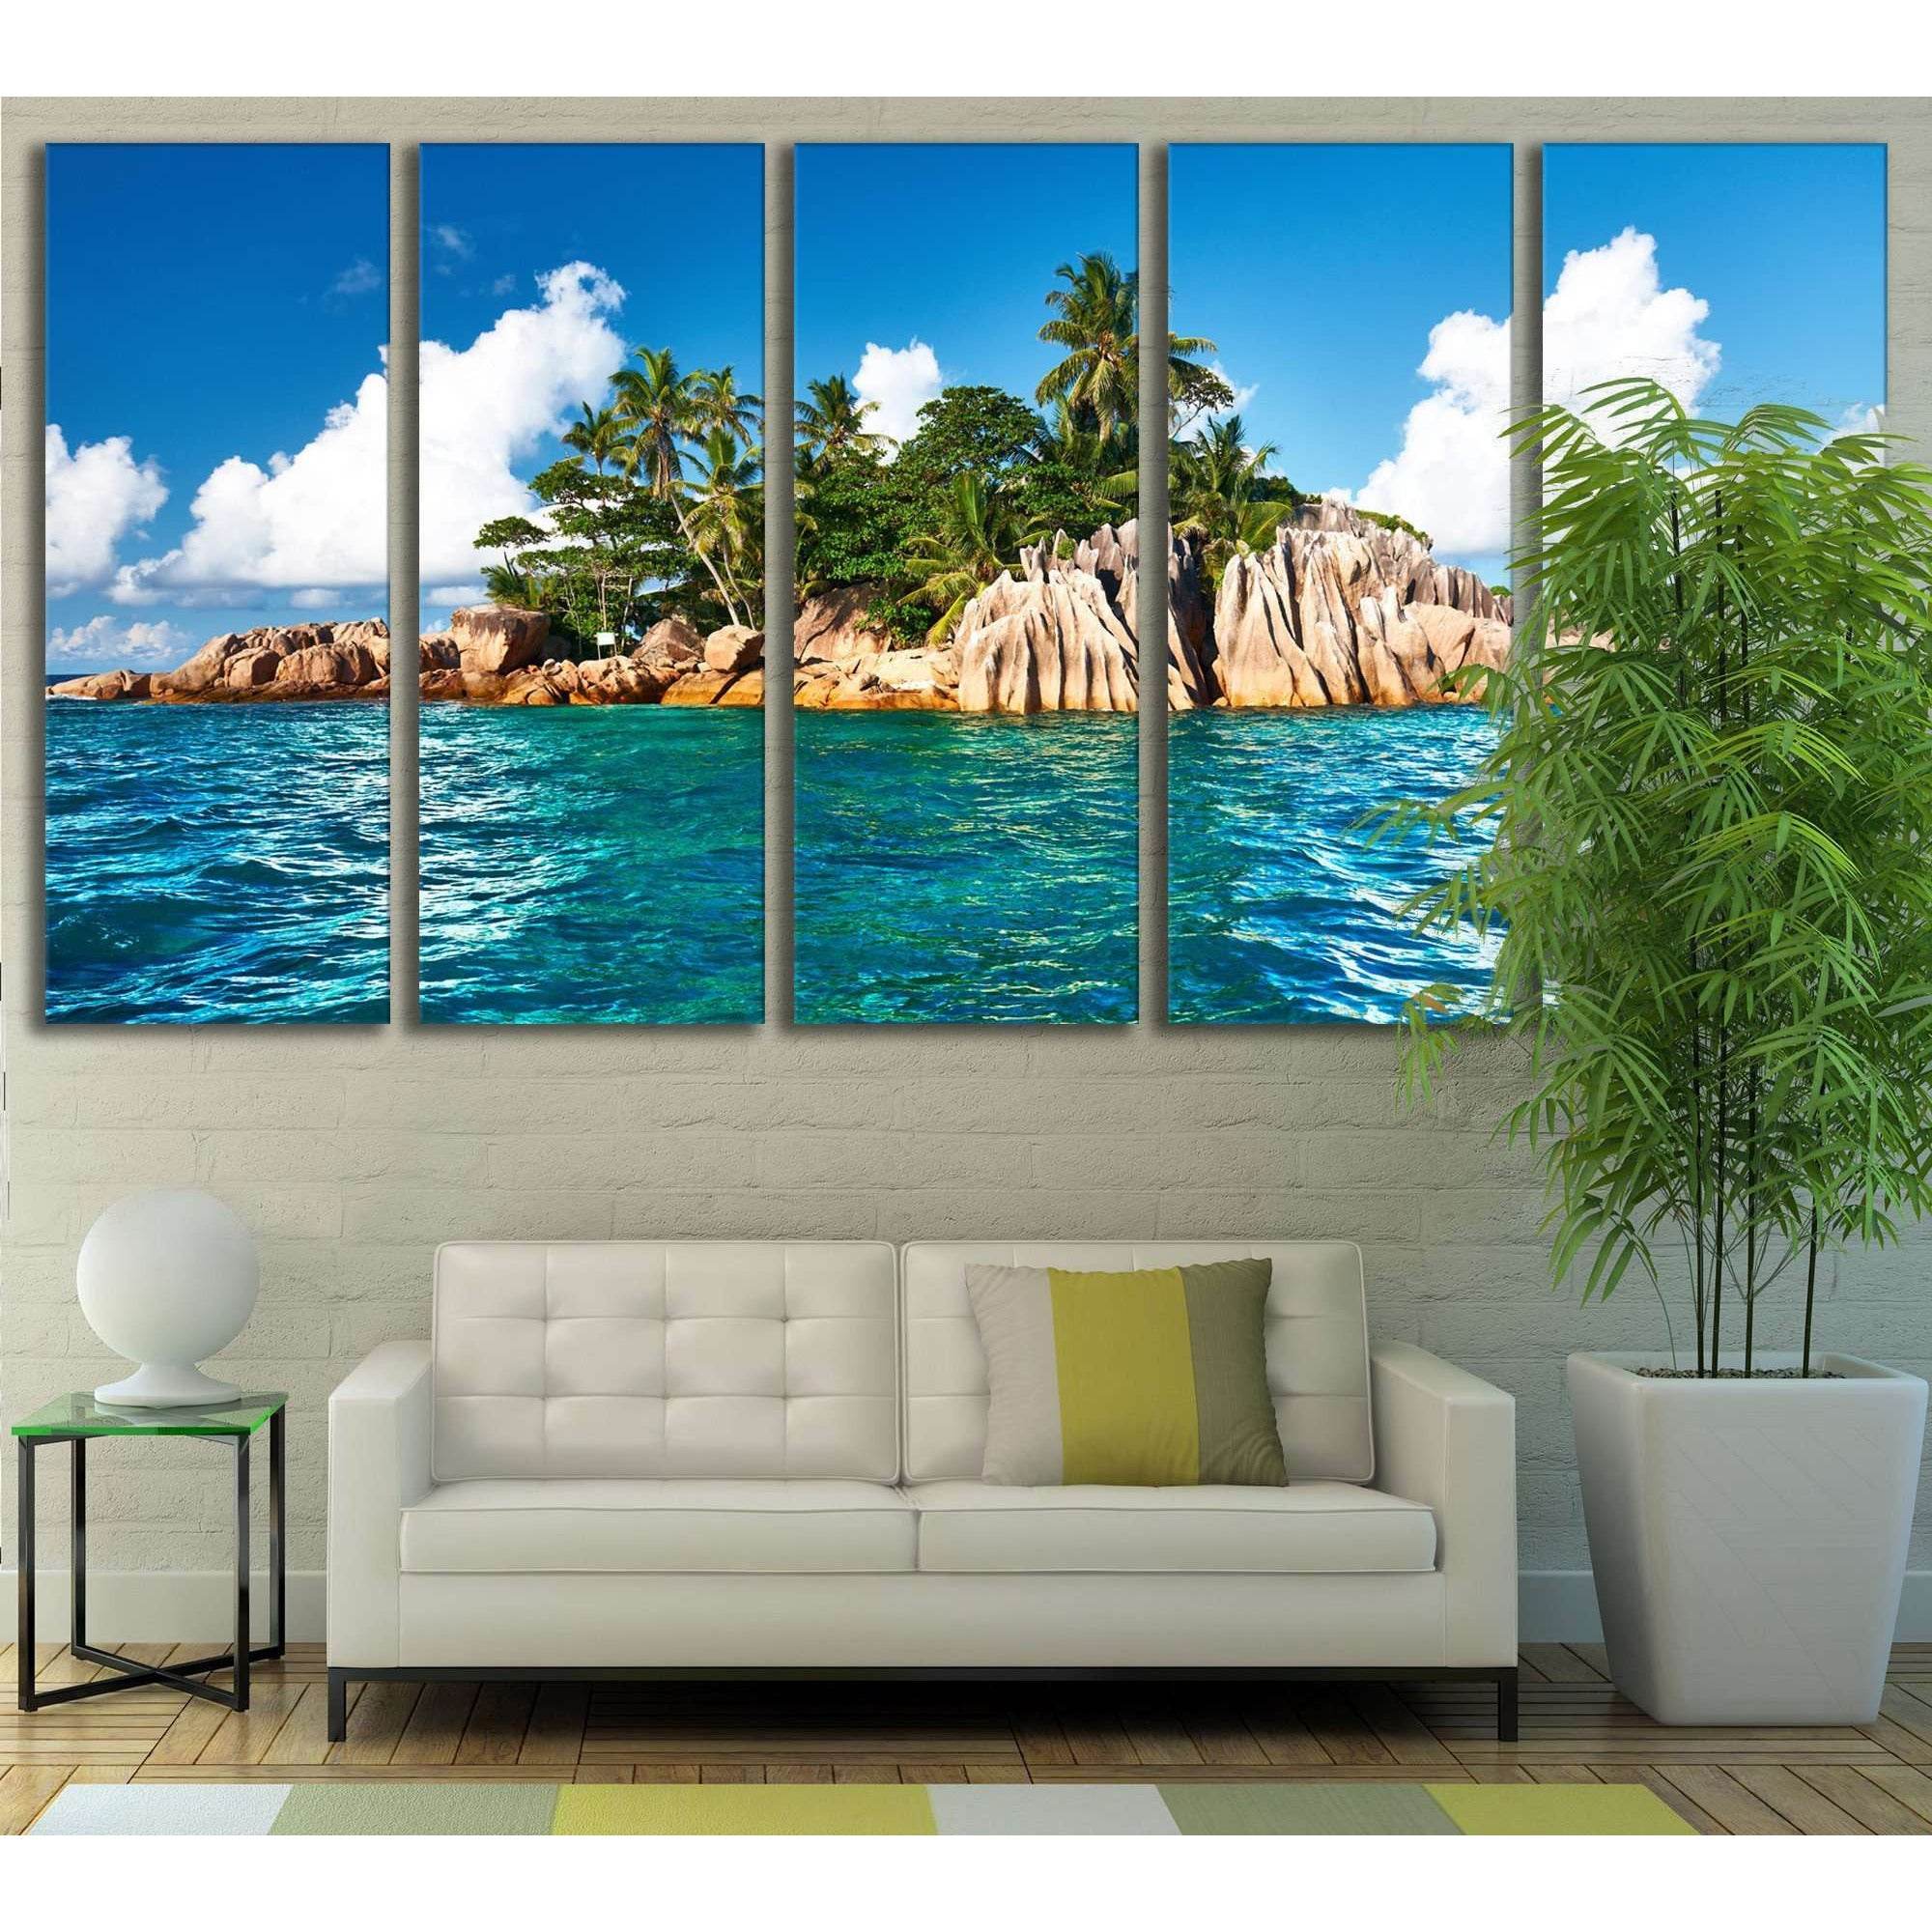 Ocean Nature №742 Ready to Hang Canvas Print